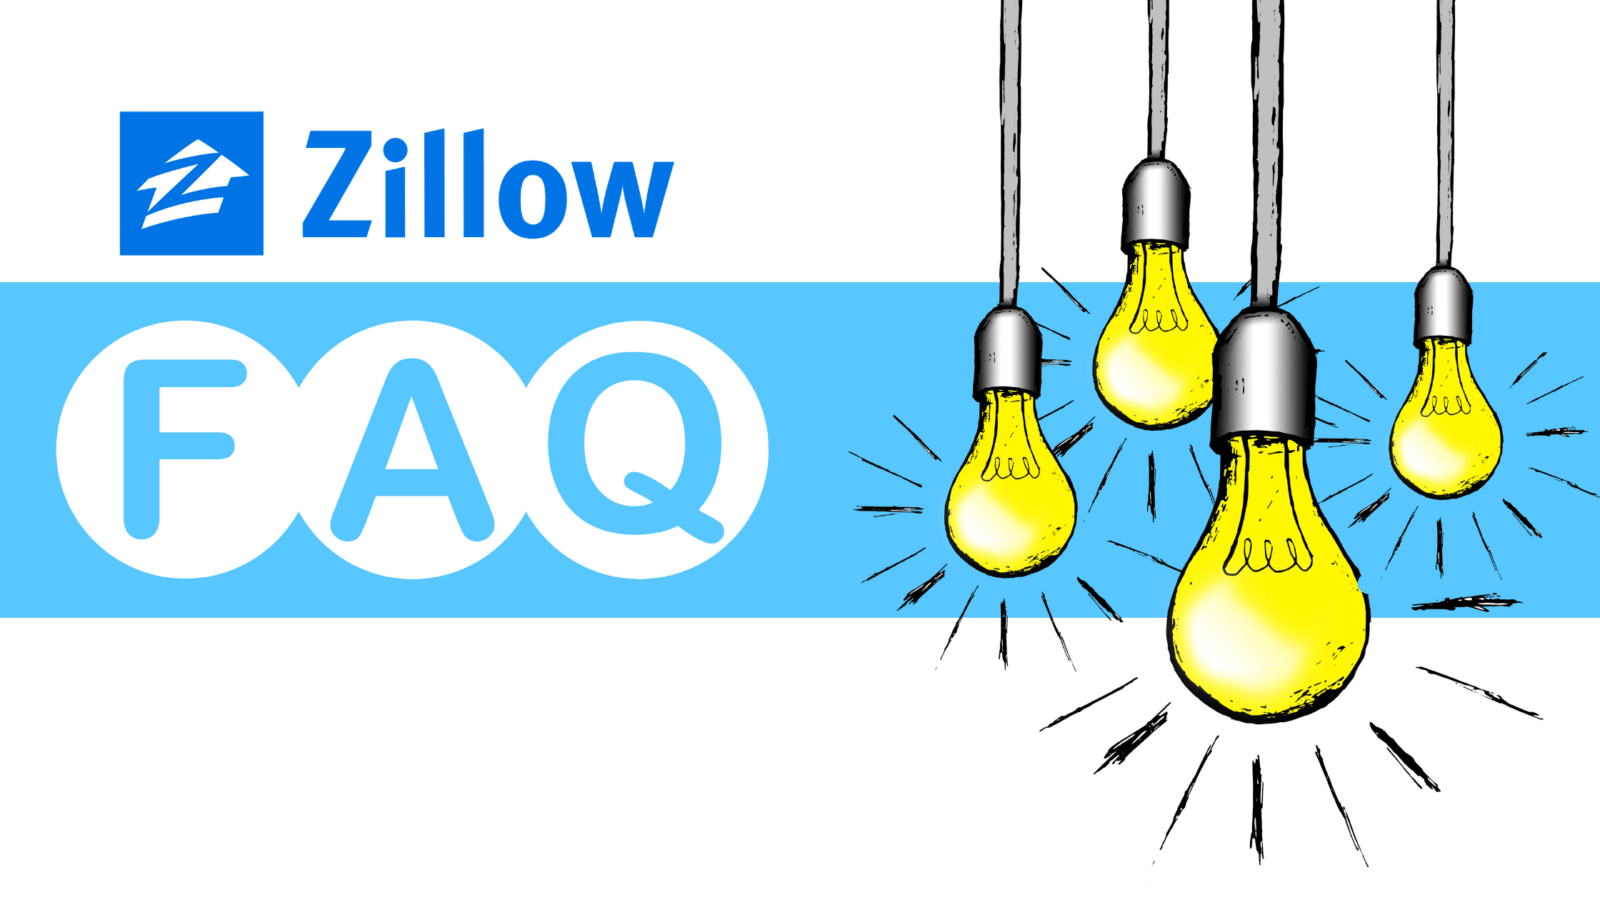 Zillow FAQ sign with illuminated lightbulbs hanging from the ceiling